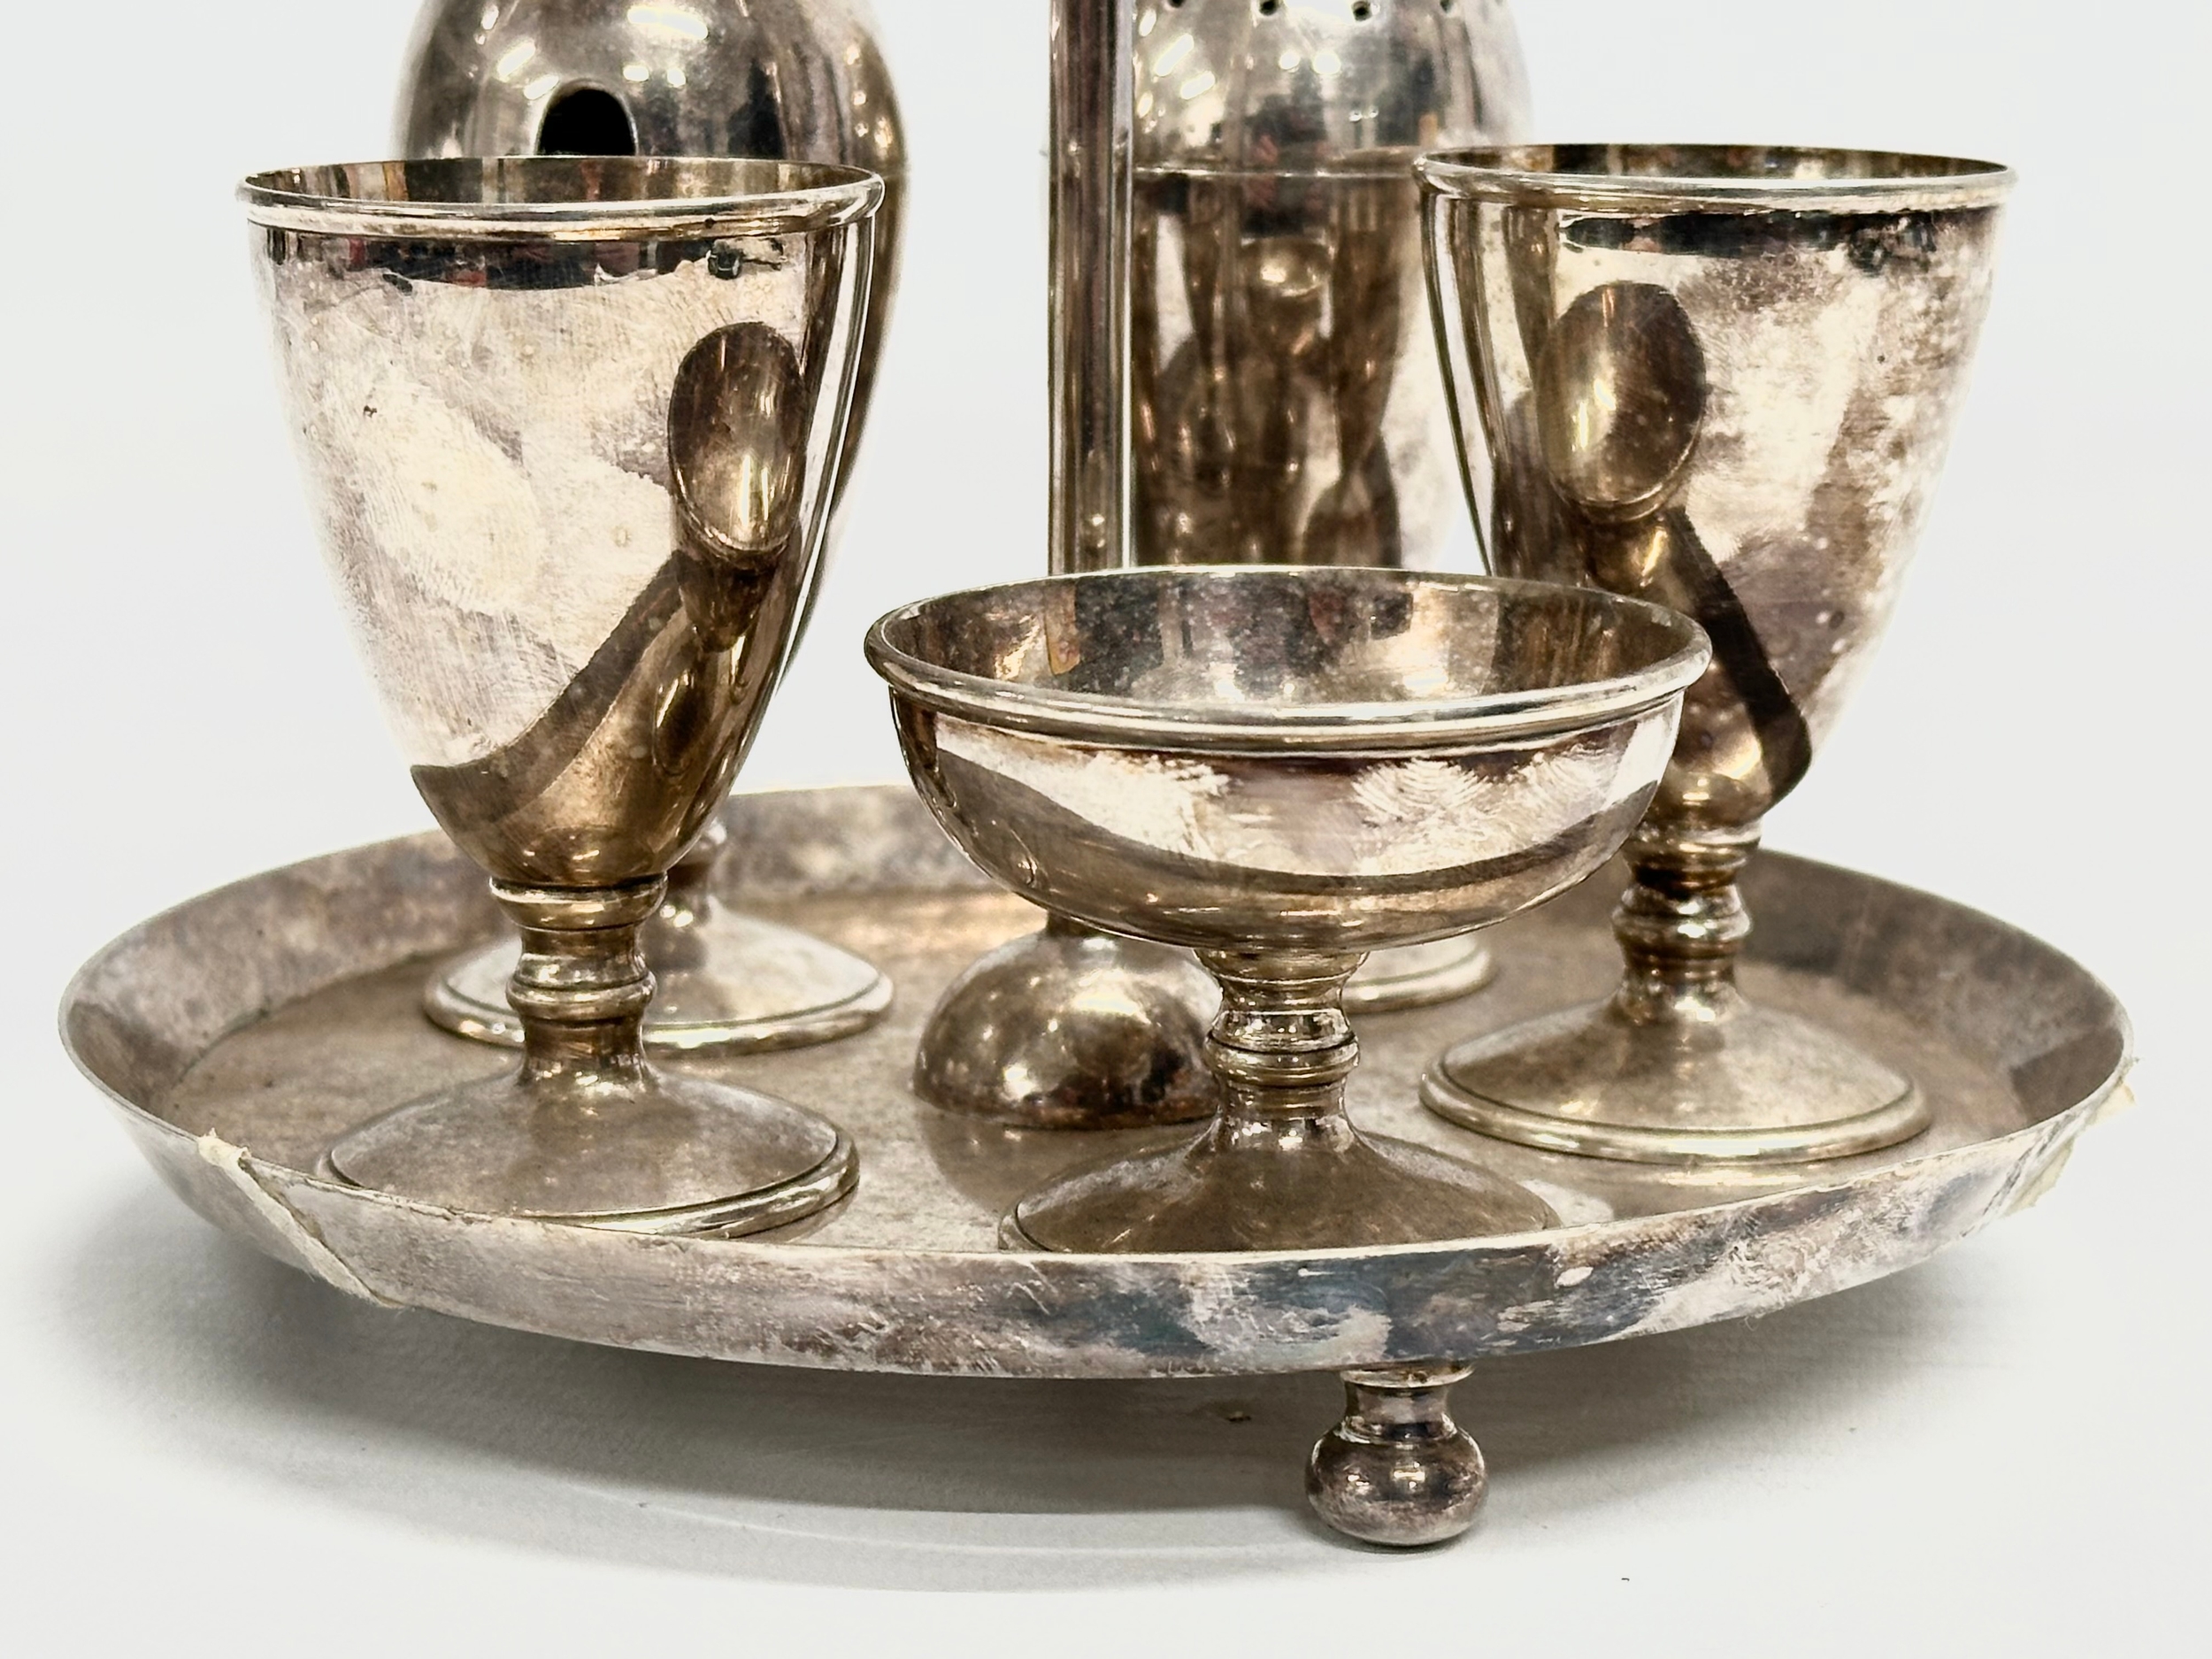 A Late 19th Century Hukin & Heath silver plated breakfast set/egg set. - Image 2 of 4